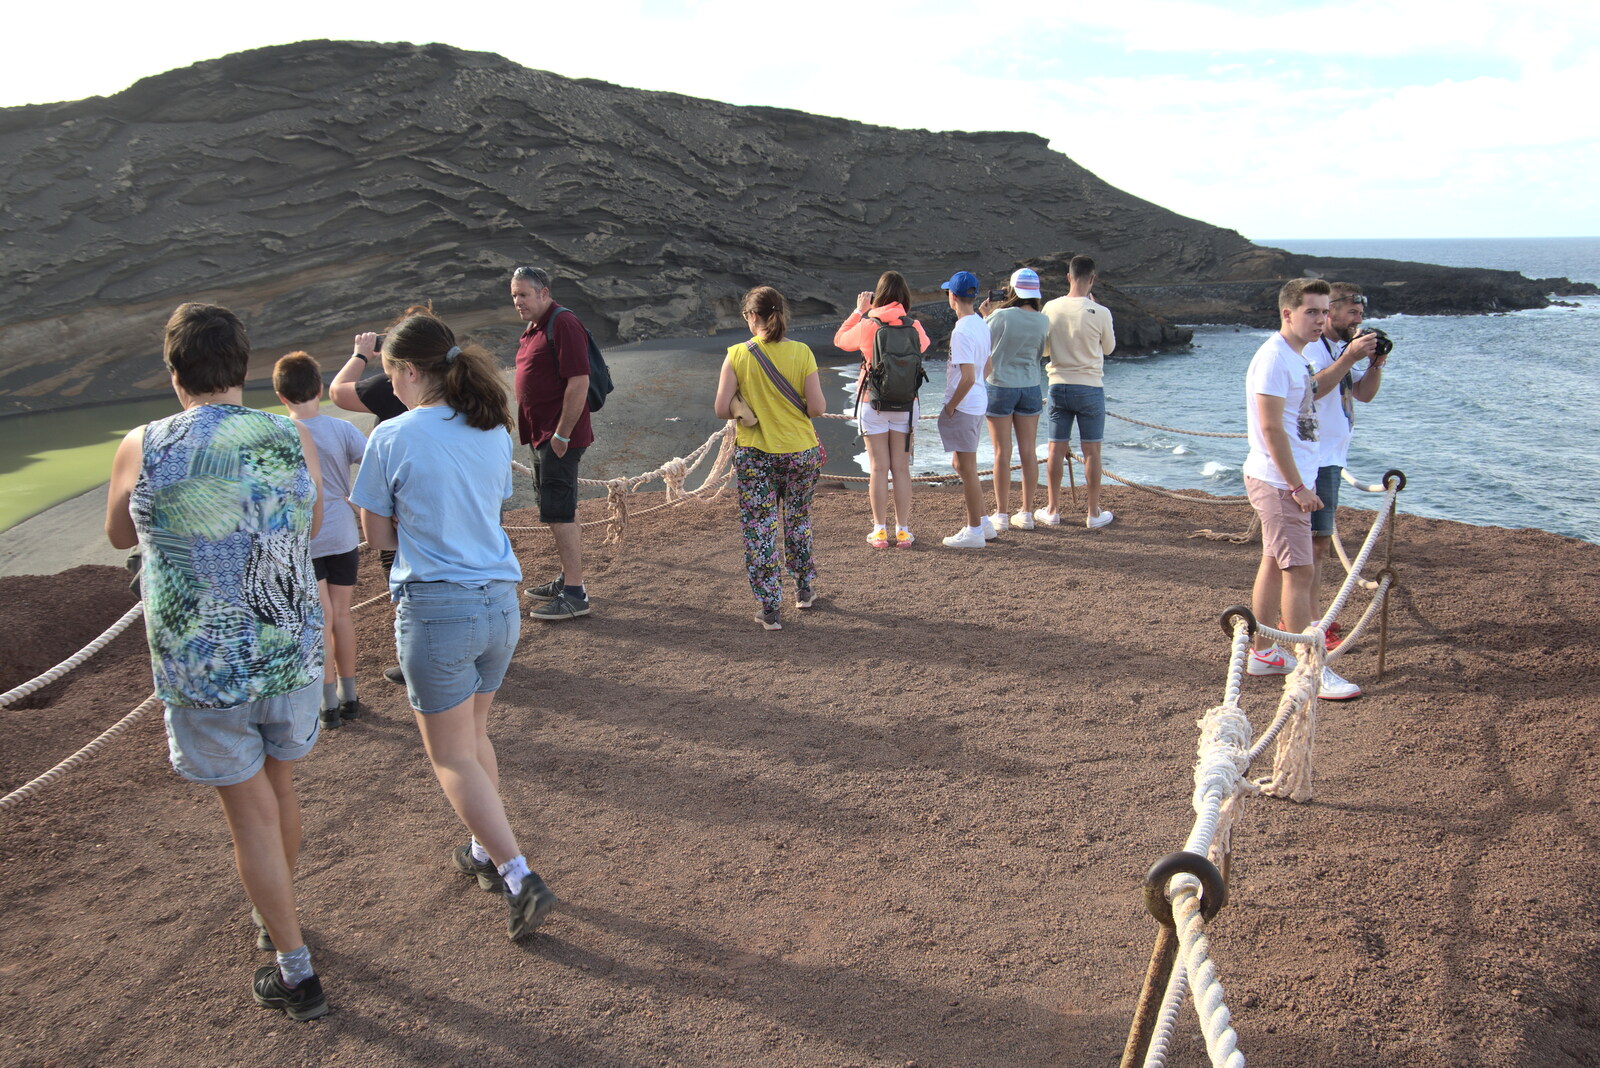 Our tour group looks out over the crater from The Volcanoes of Lanzarote, Canary Islands, Spain - 27th October 2021